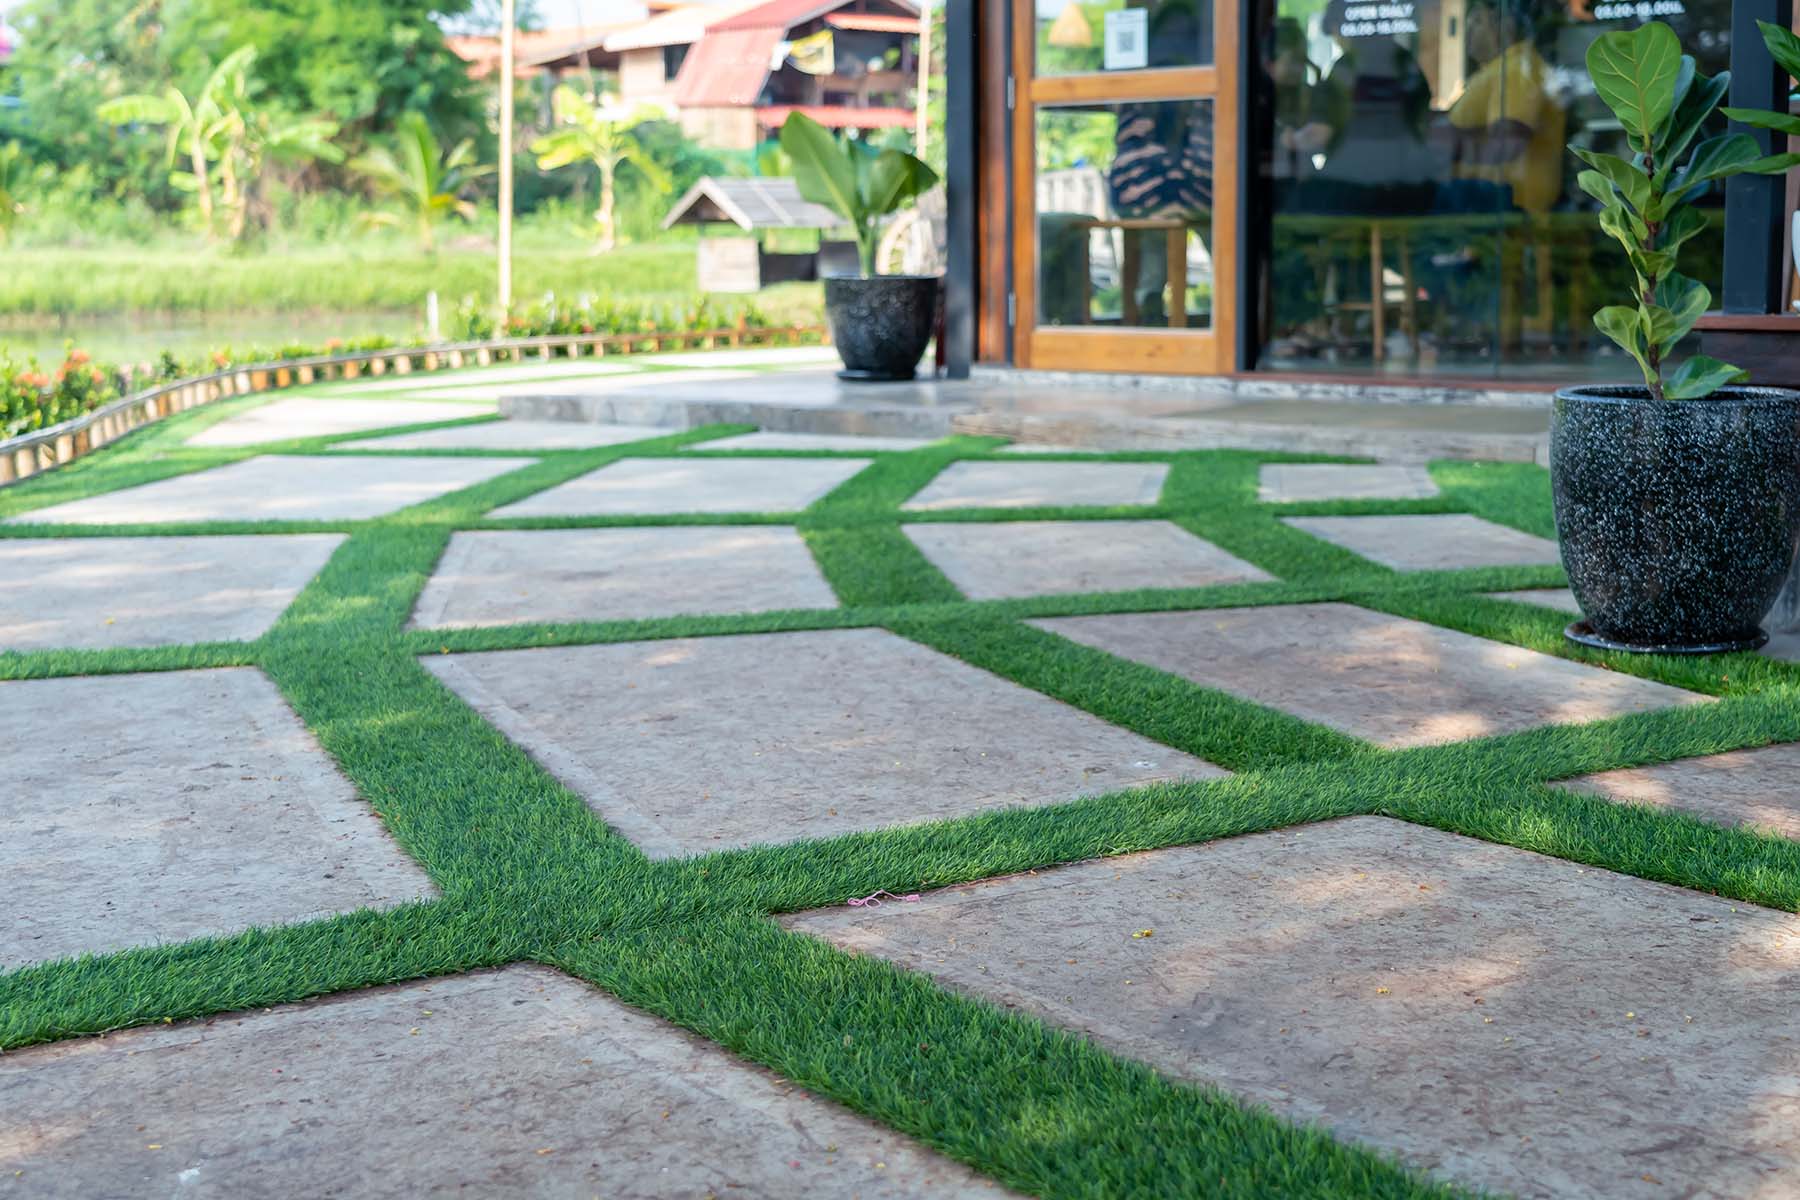 Enhancing Walkways with Concrete Pavers in Grass: A Green and Functional Solution